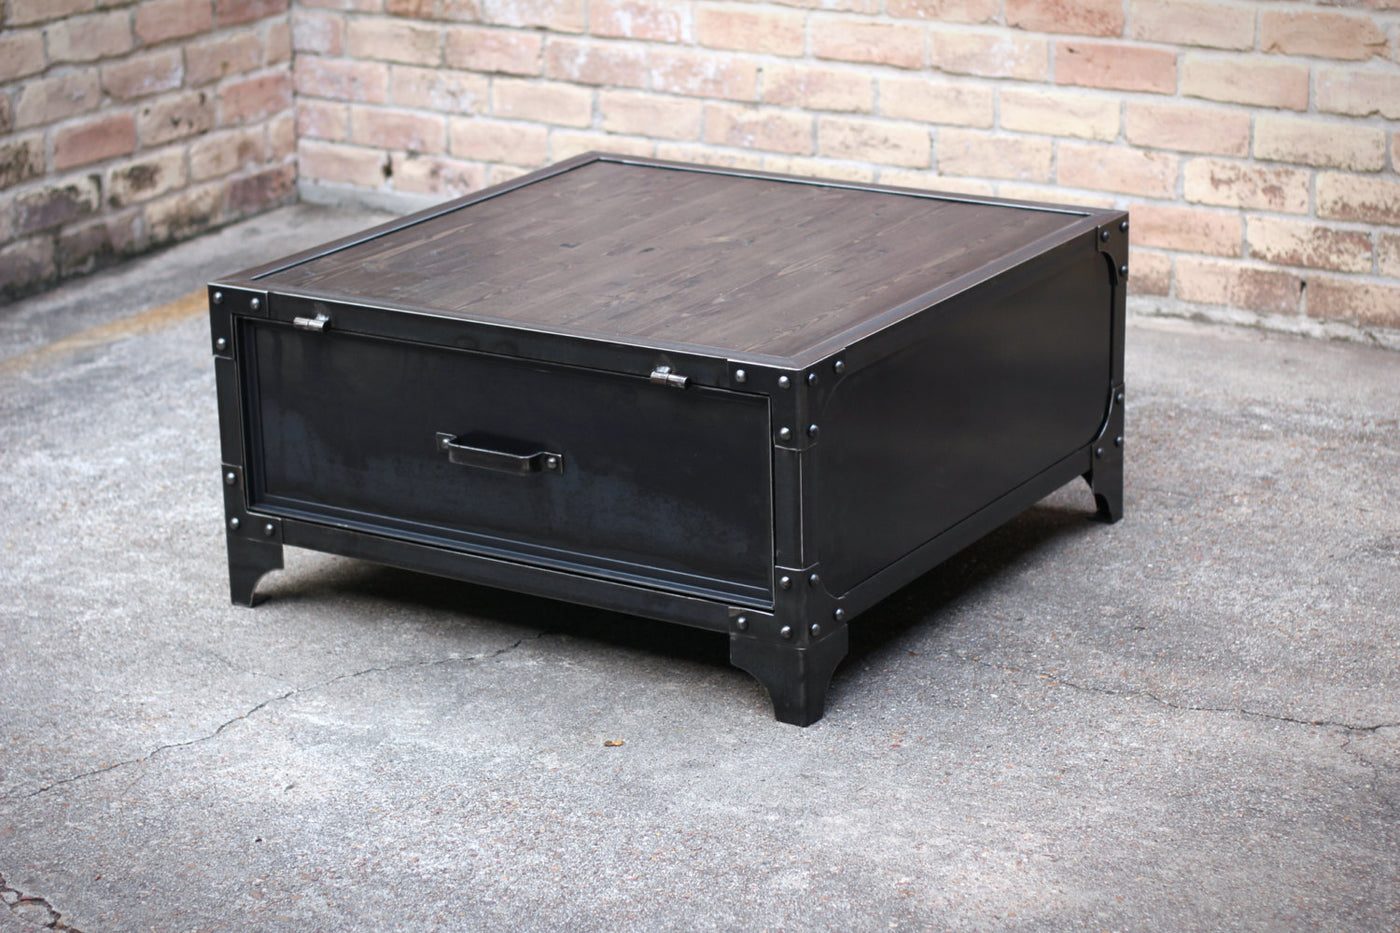 Industrial Metal and Wood Coffee Table